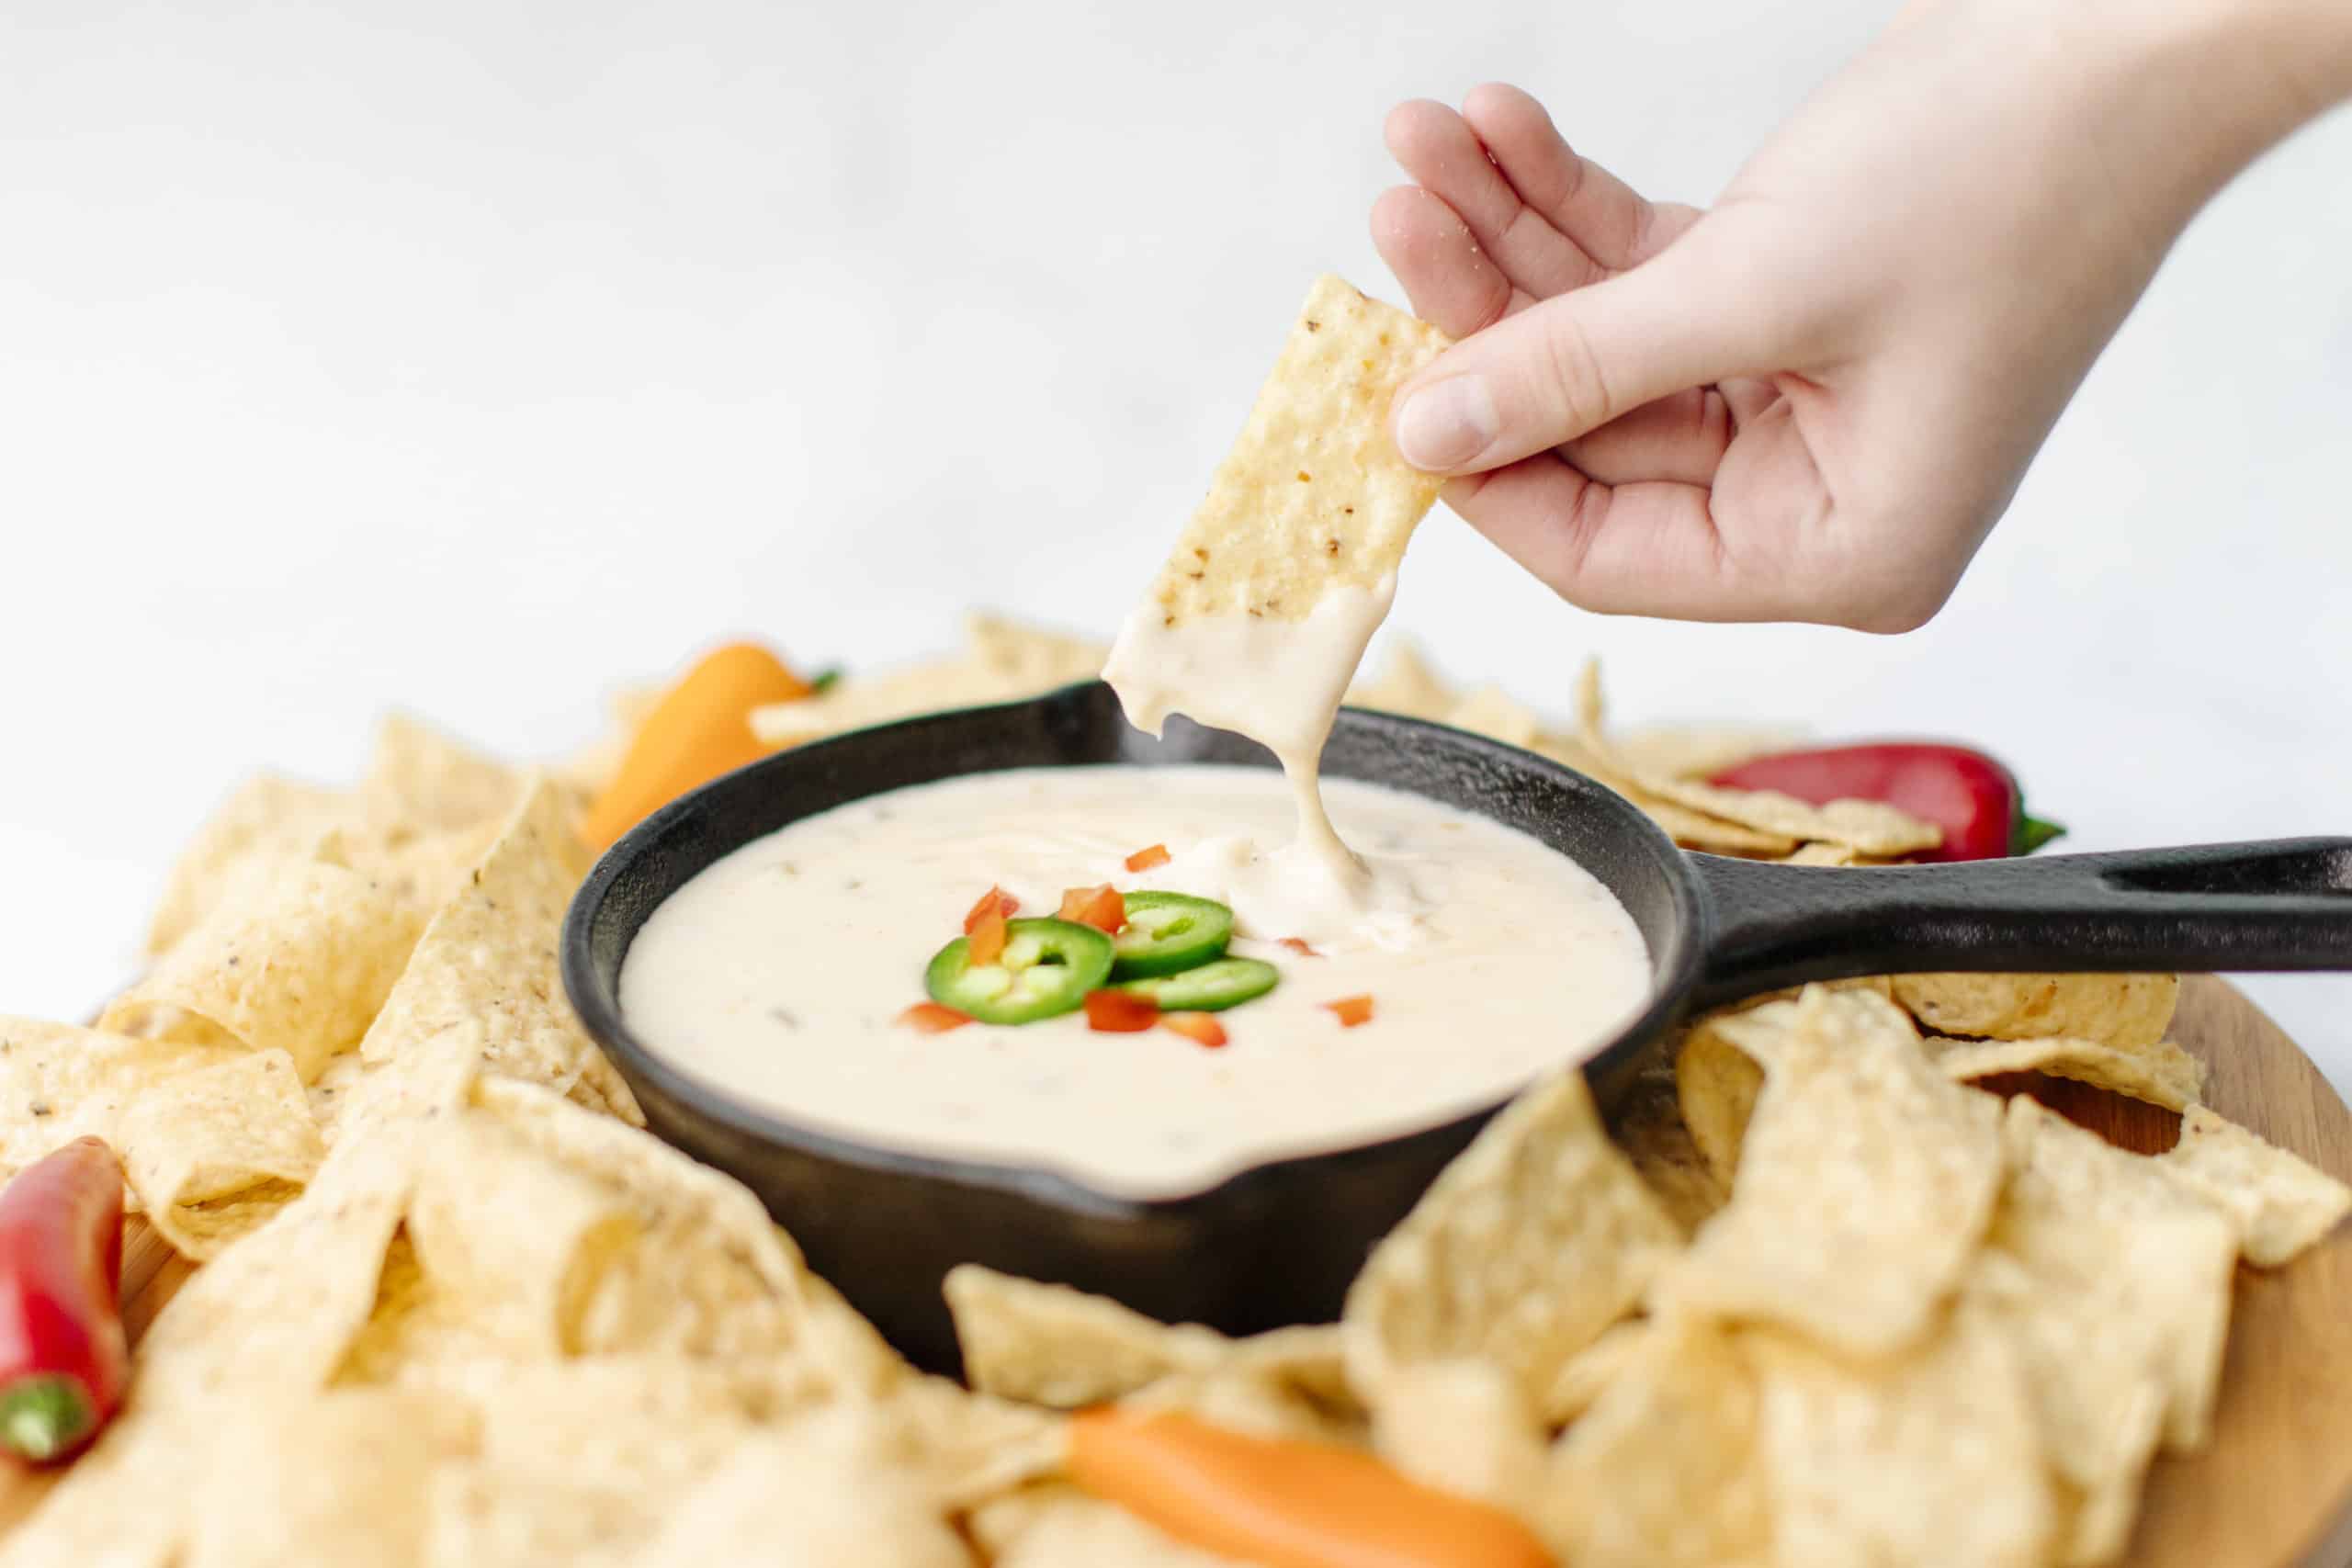 Hand dip the tortilla chips into the white queso dip recipe.